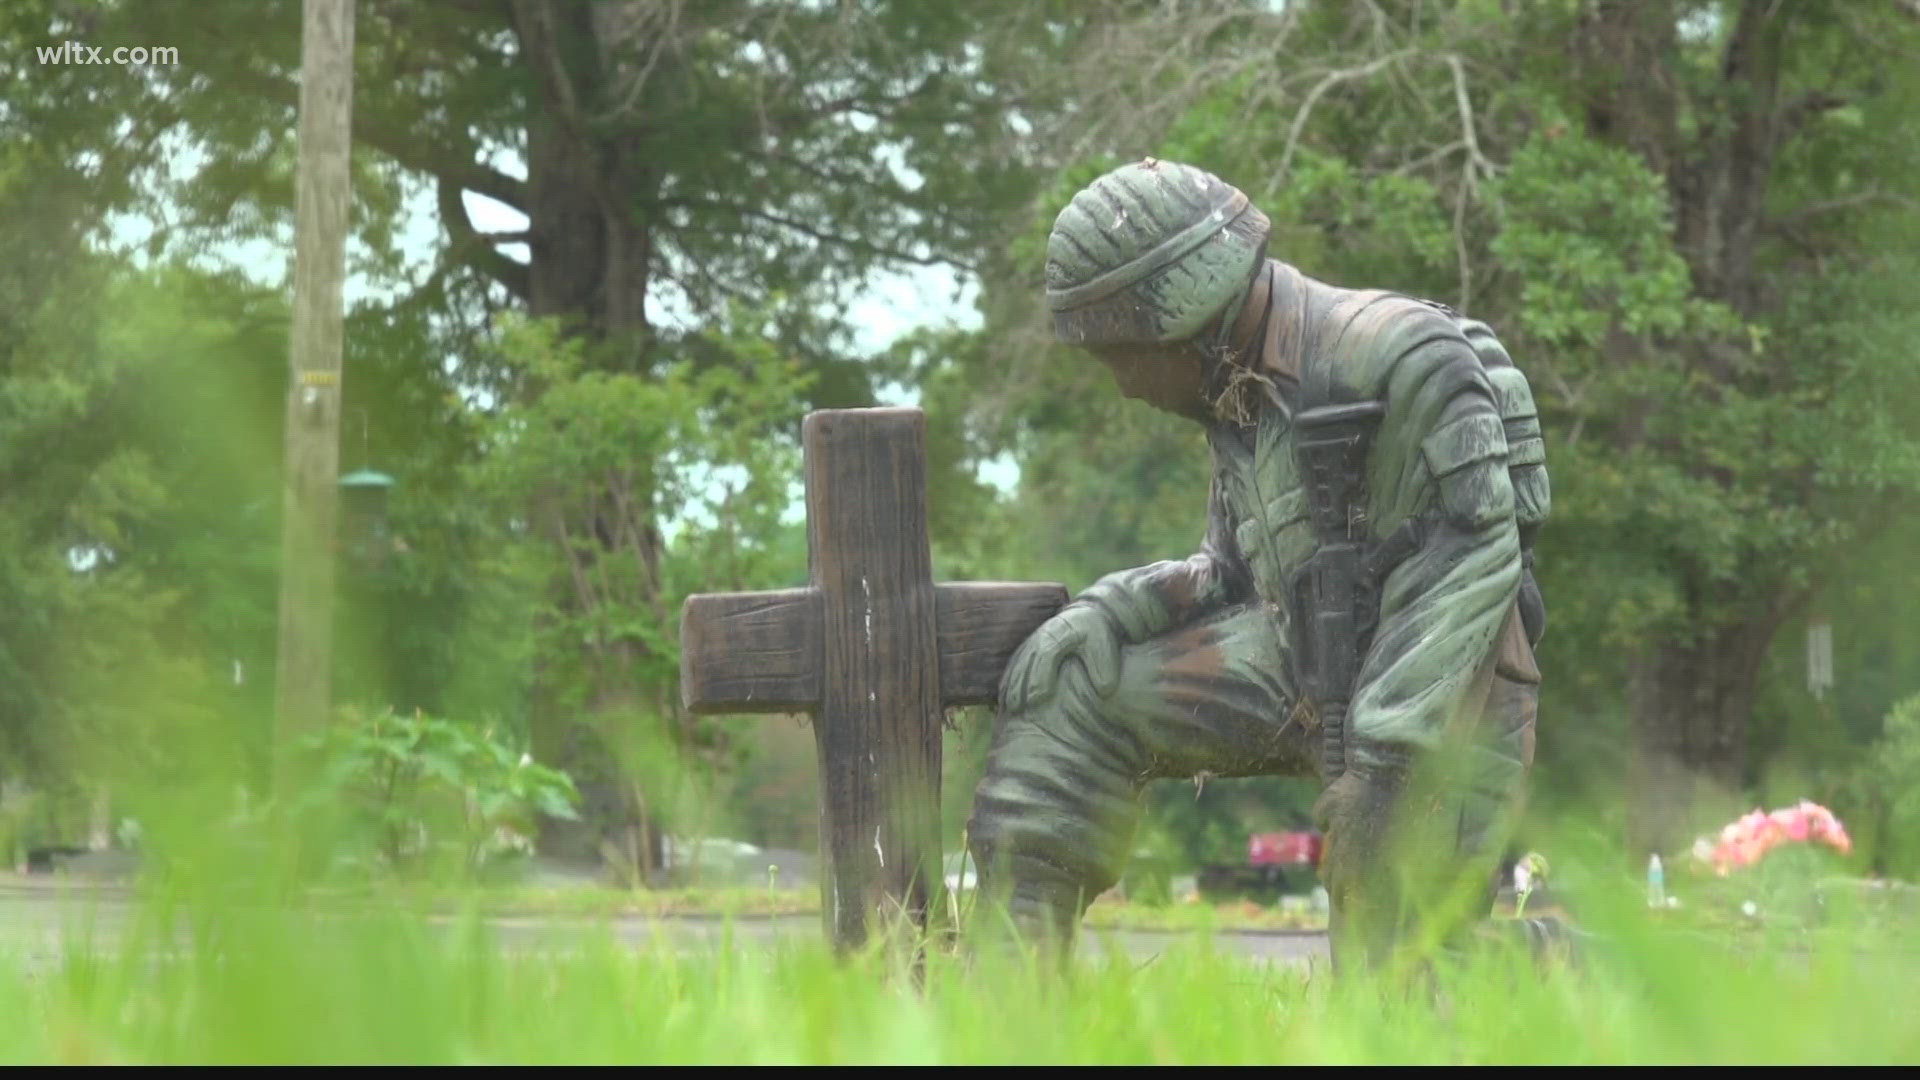 More than 2000 veterans are buried at the Sumter Cemetery. Now, a new memorial is honoring them.